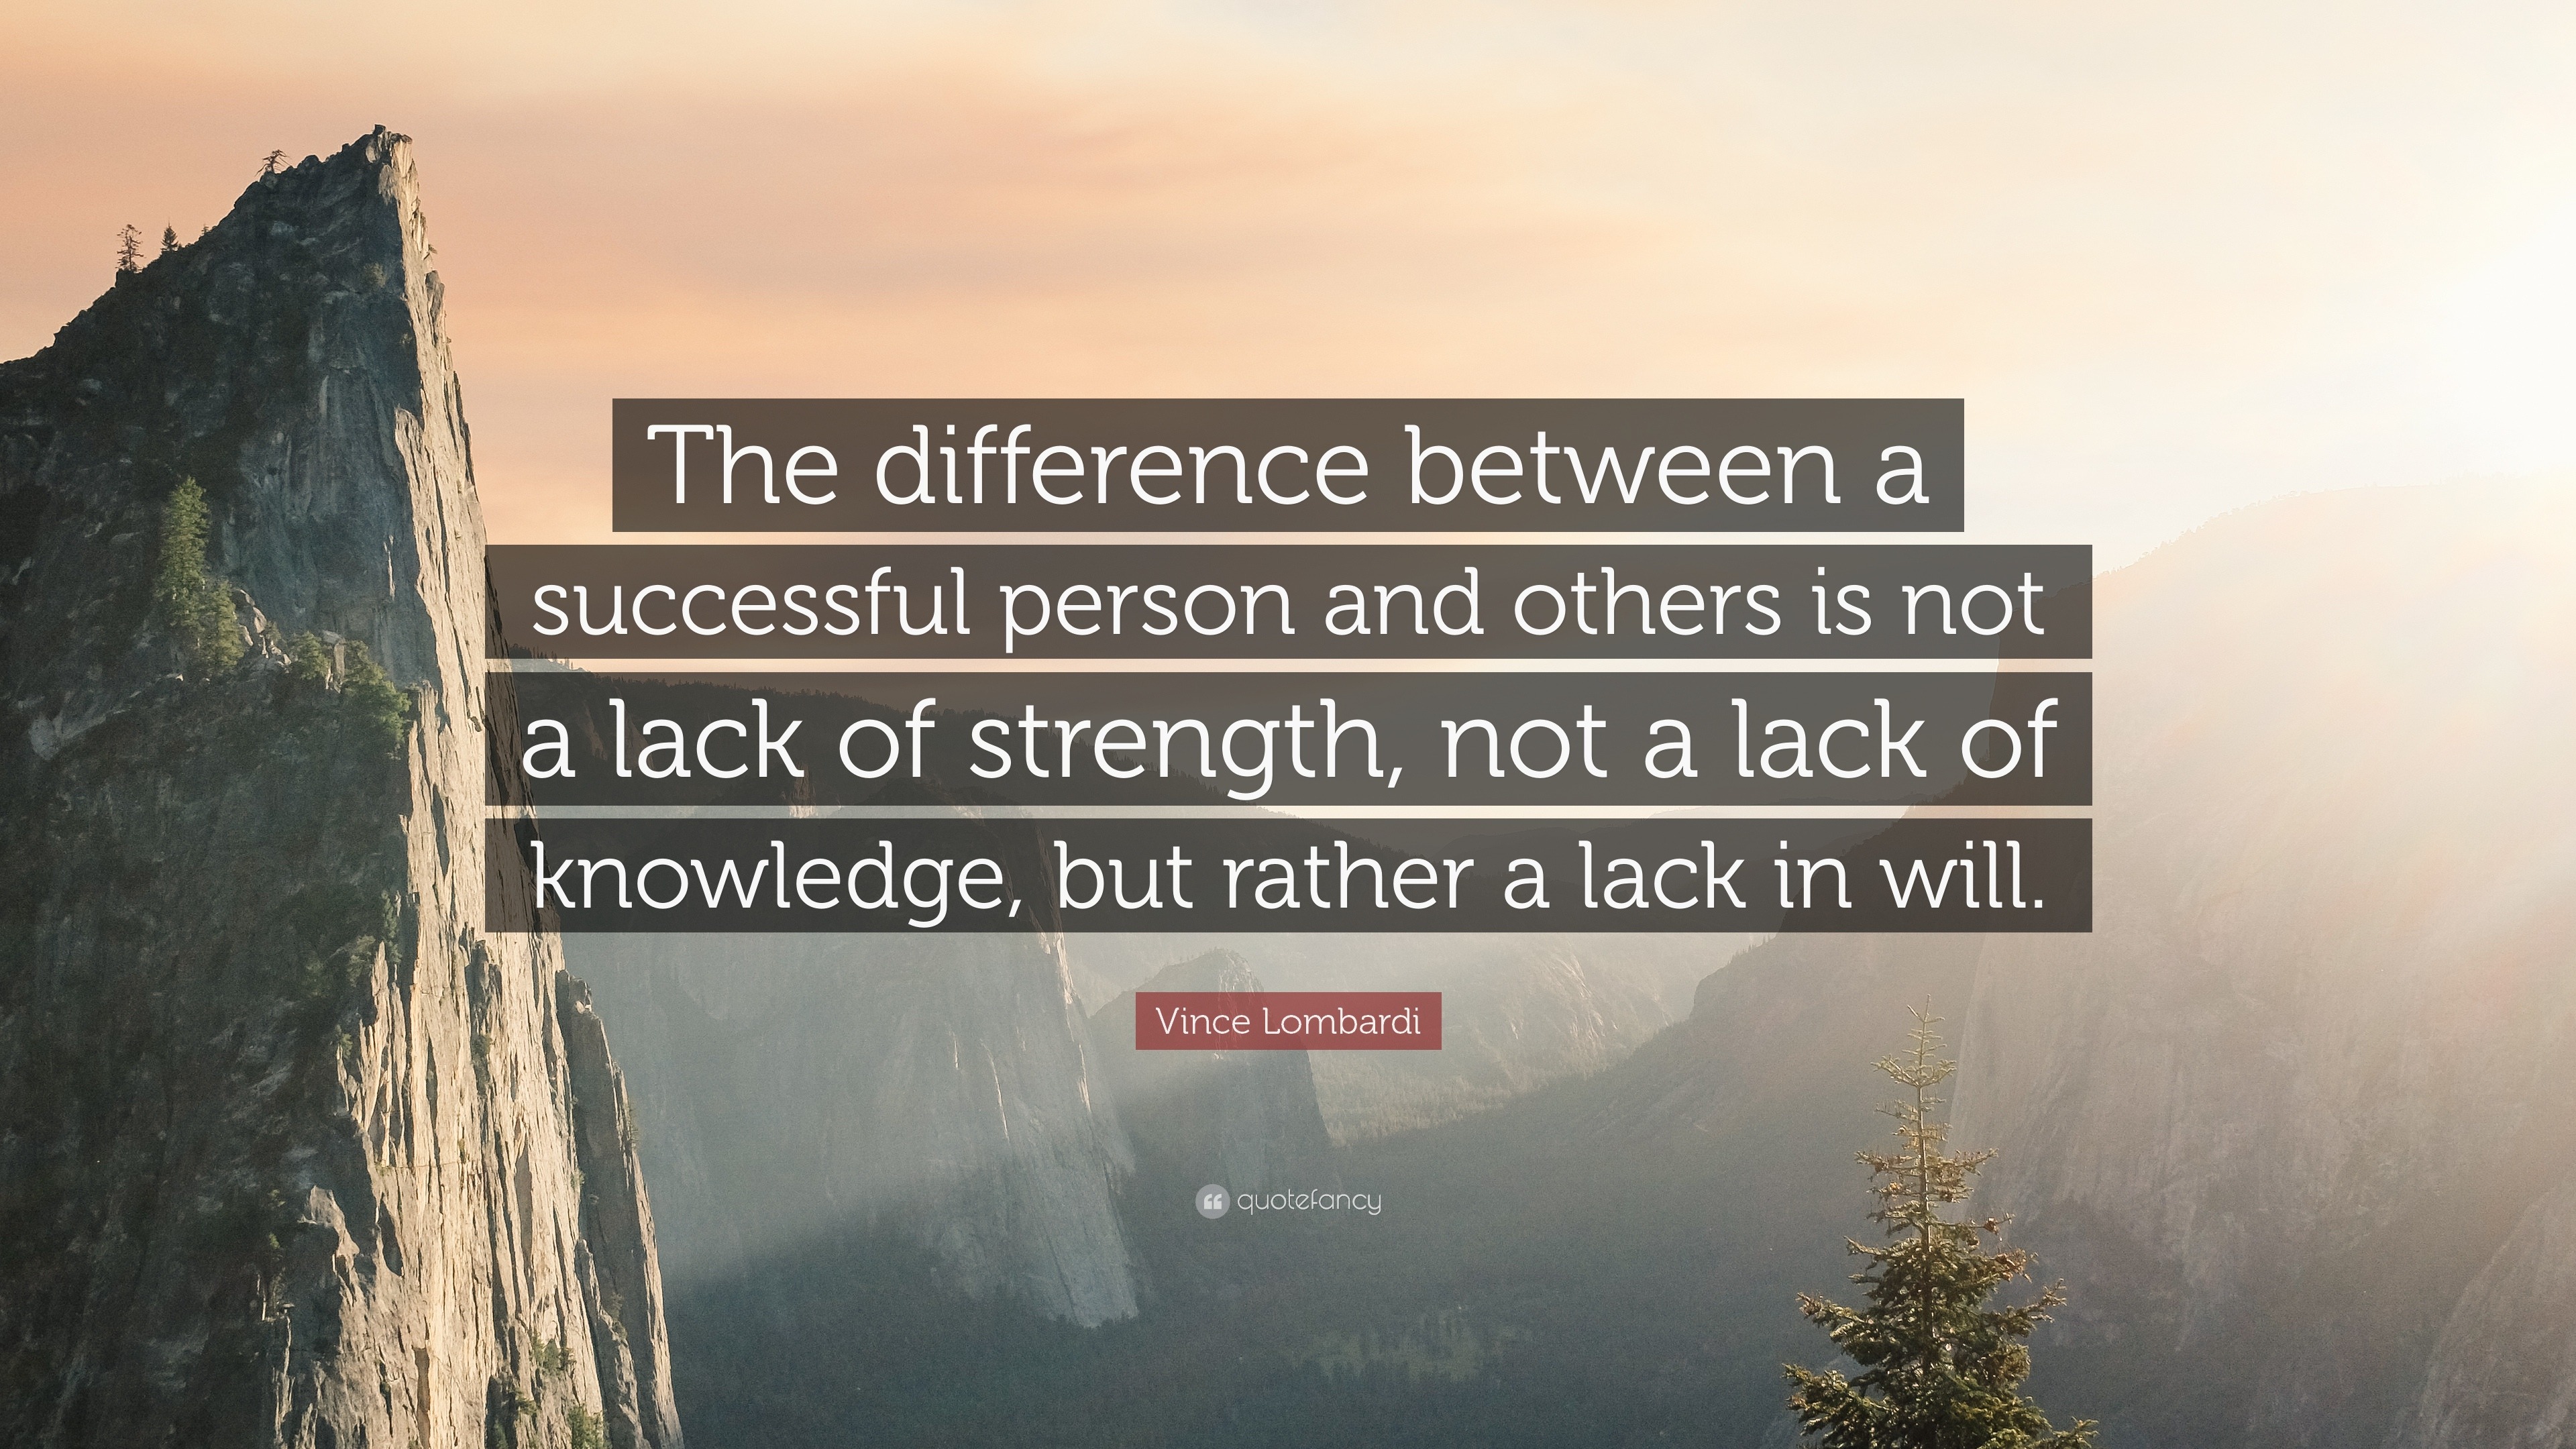 Vince Lombardi Quote The Difference Between A Successful Person And Others Is Not A Lack Of